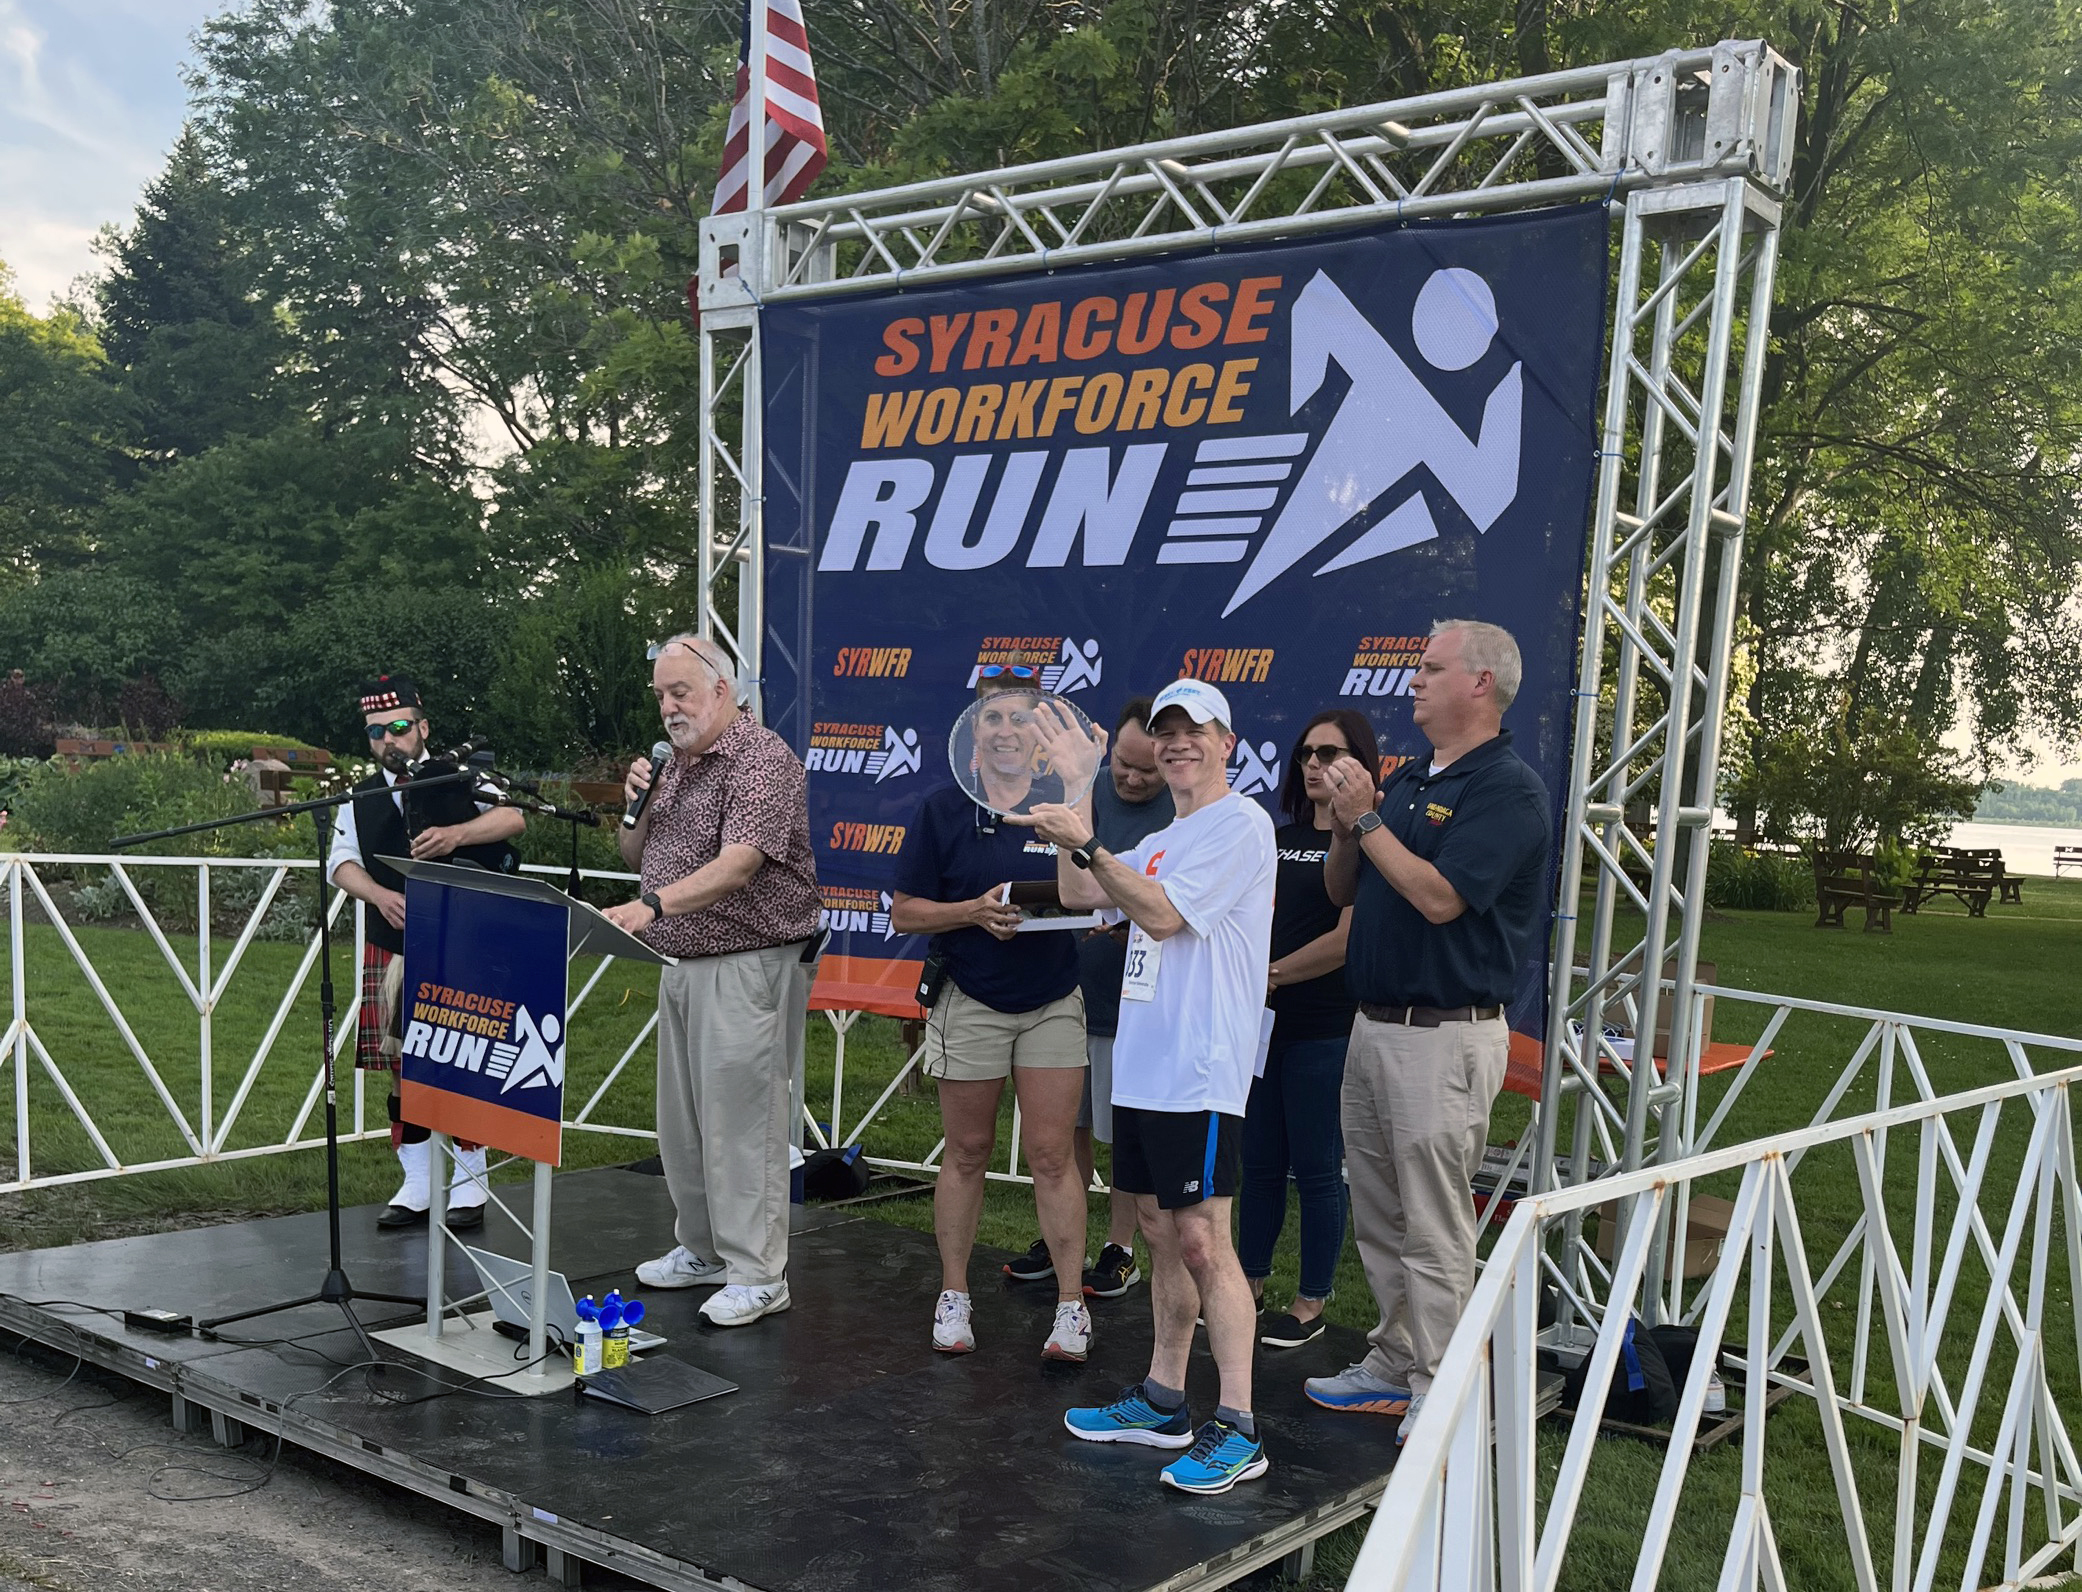 Dean J. Cole Smith accepts award for having the largest team presence at the 2023 Syracuse WorkForce Run